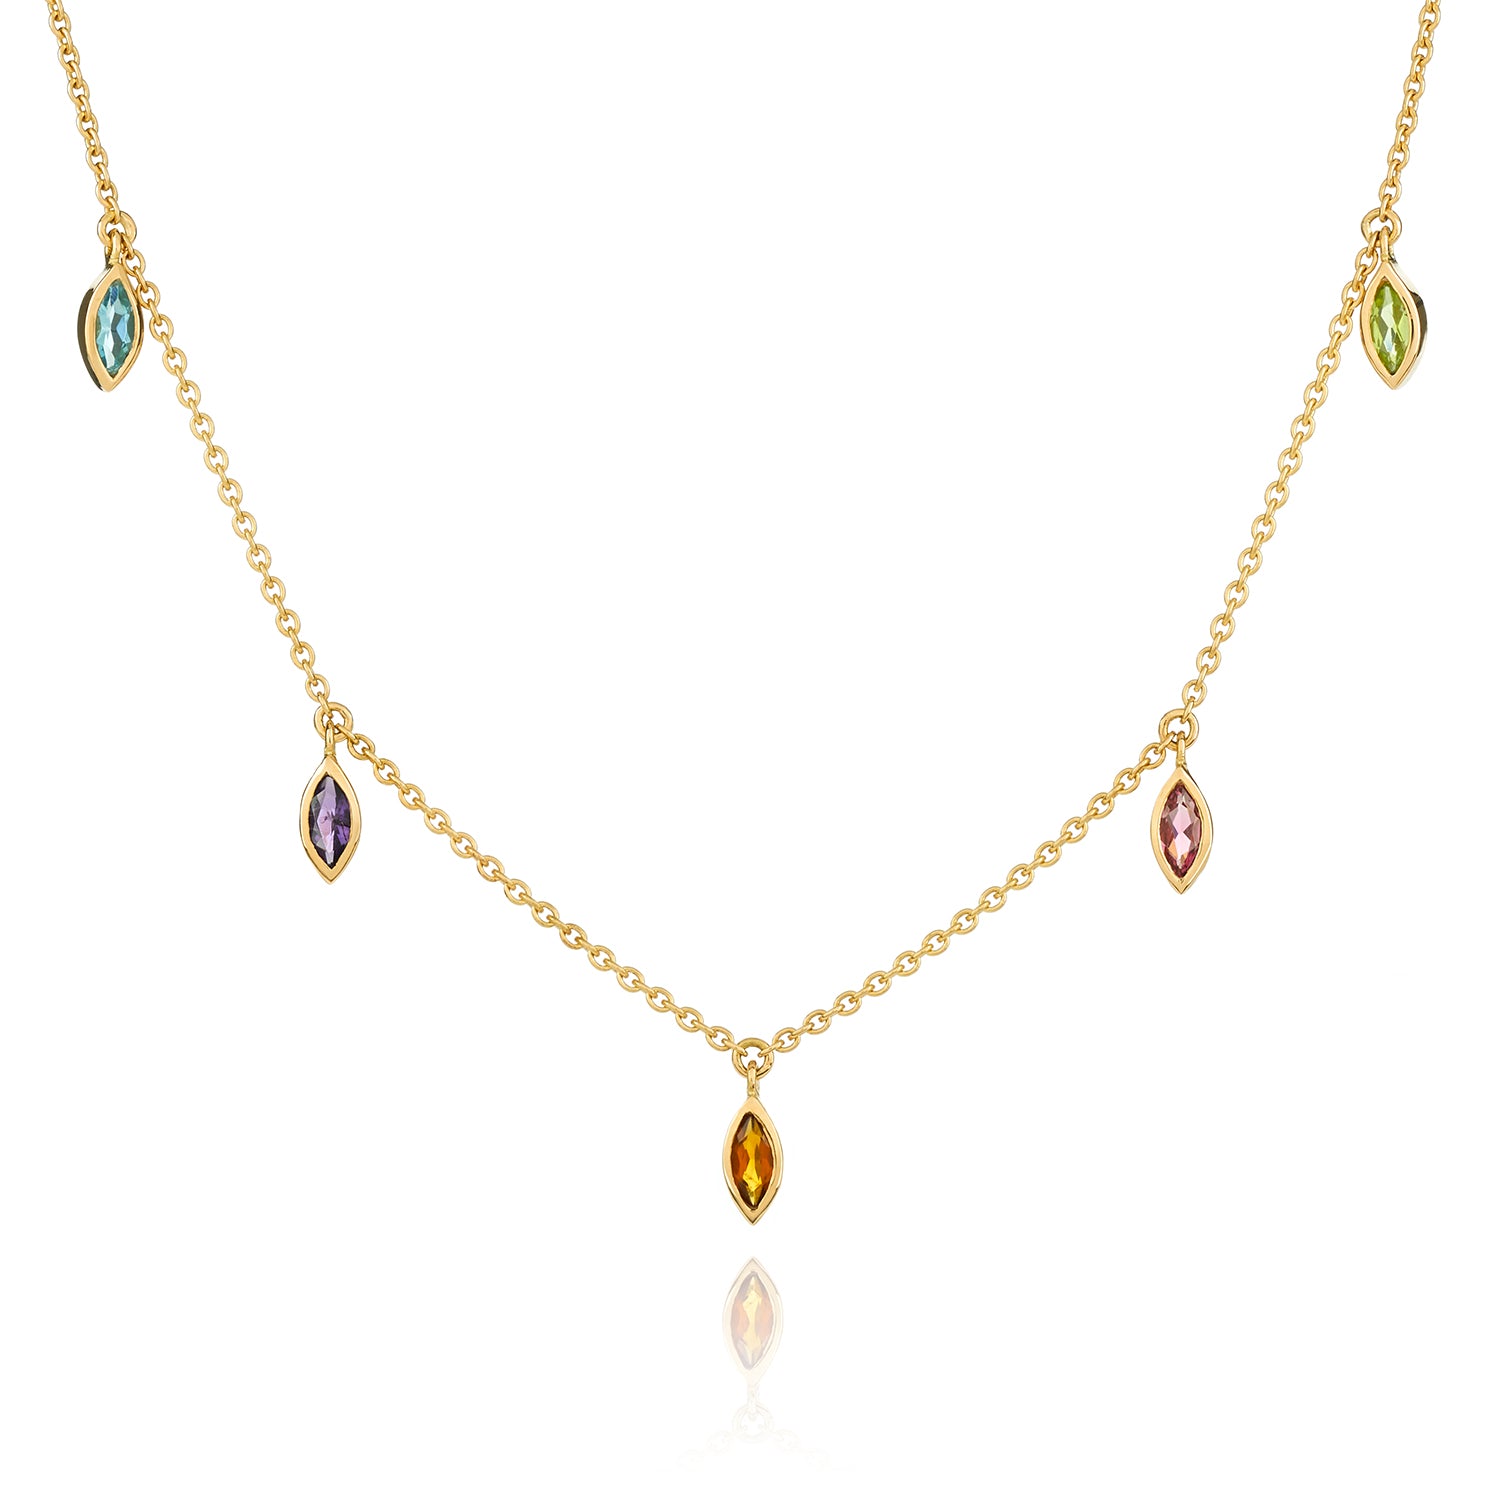 Marquis Necklace by McFarlane Fine Jewellery